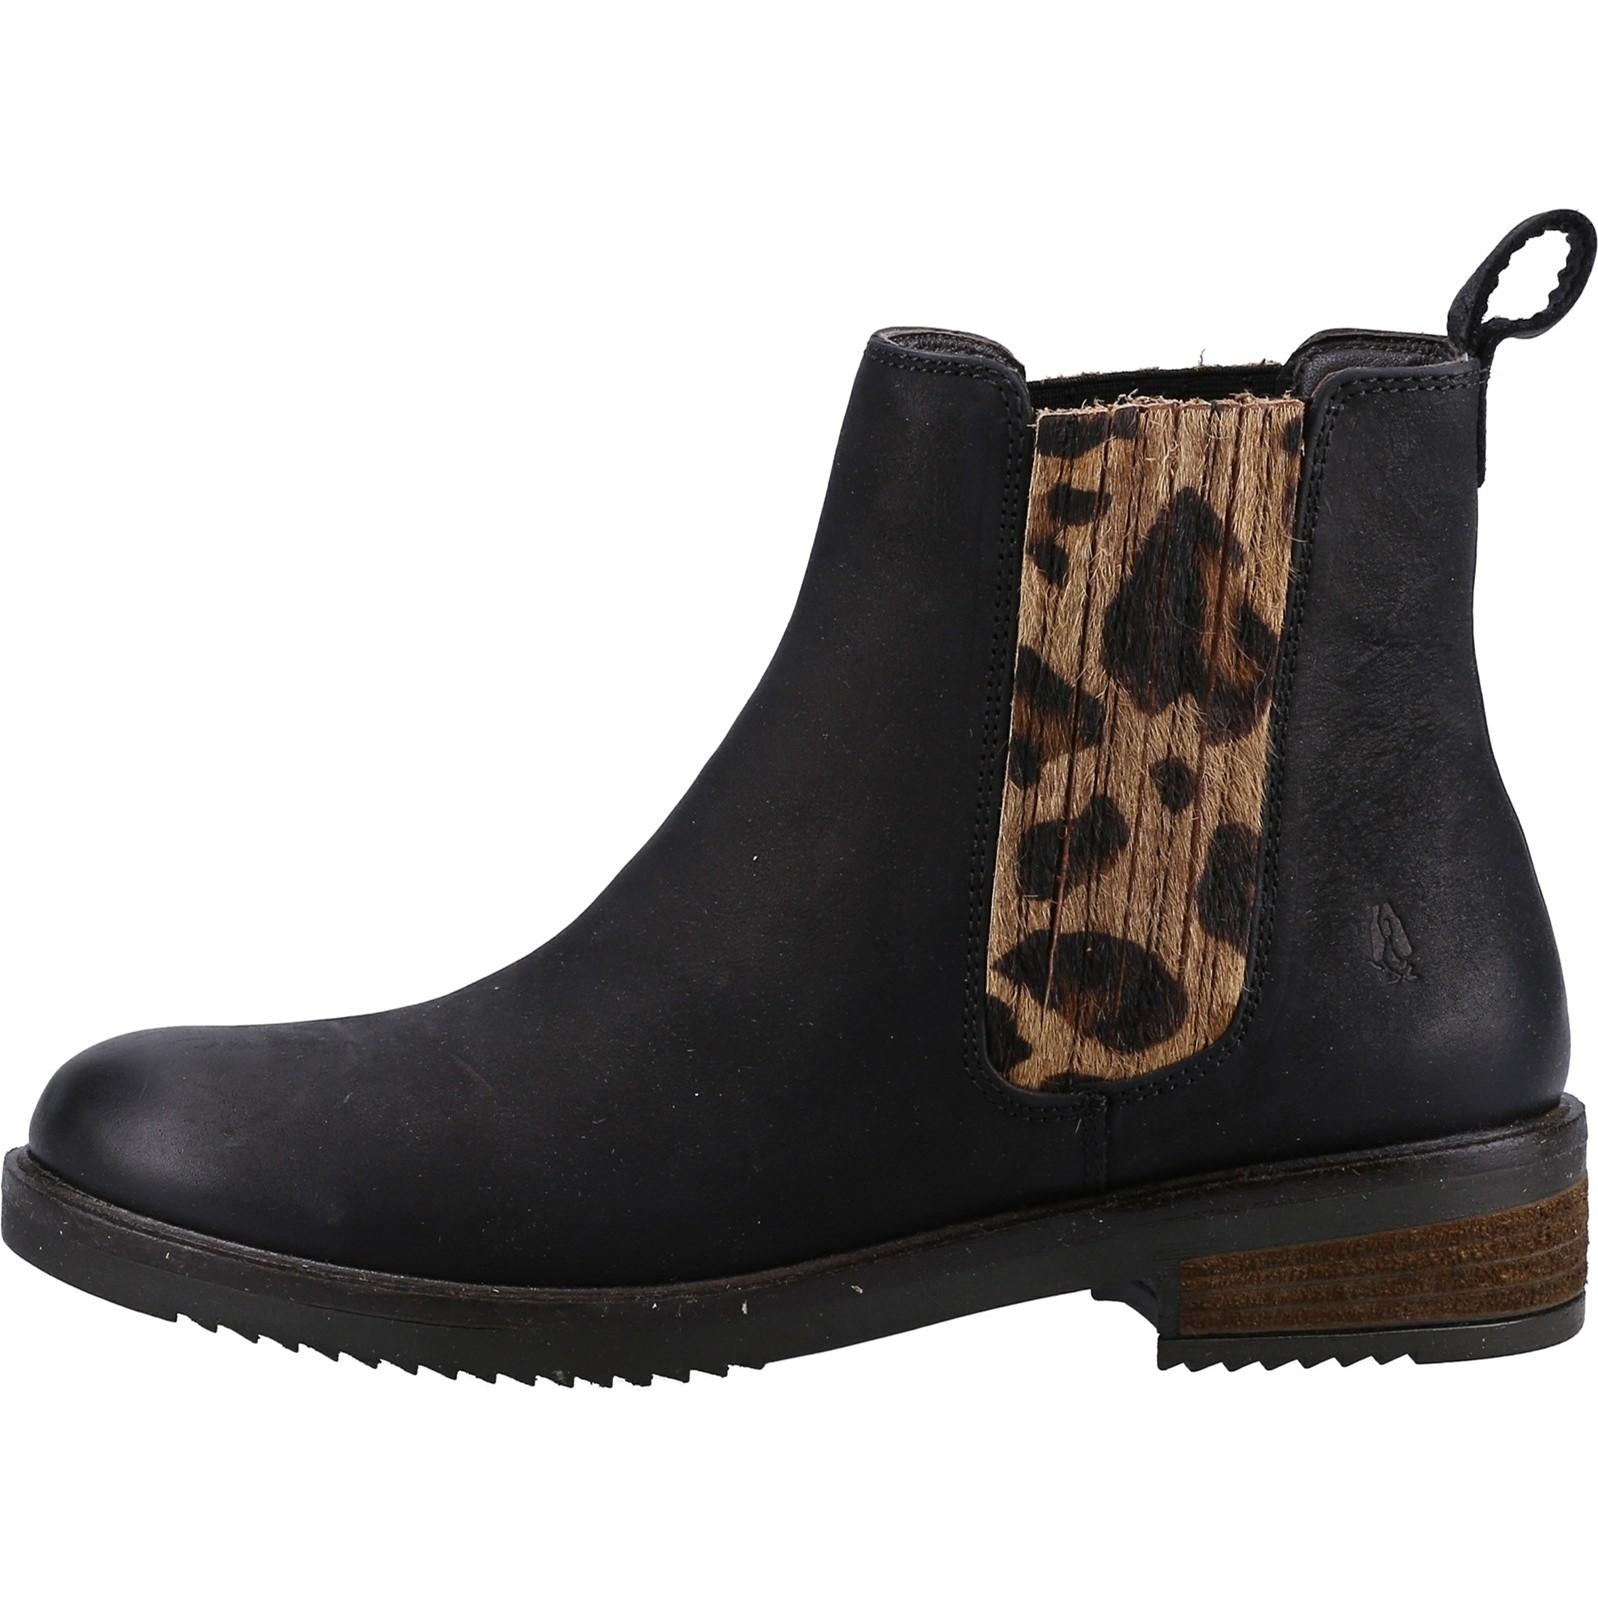 Hush Puppies Stella Ankle Boot